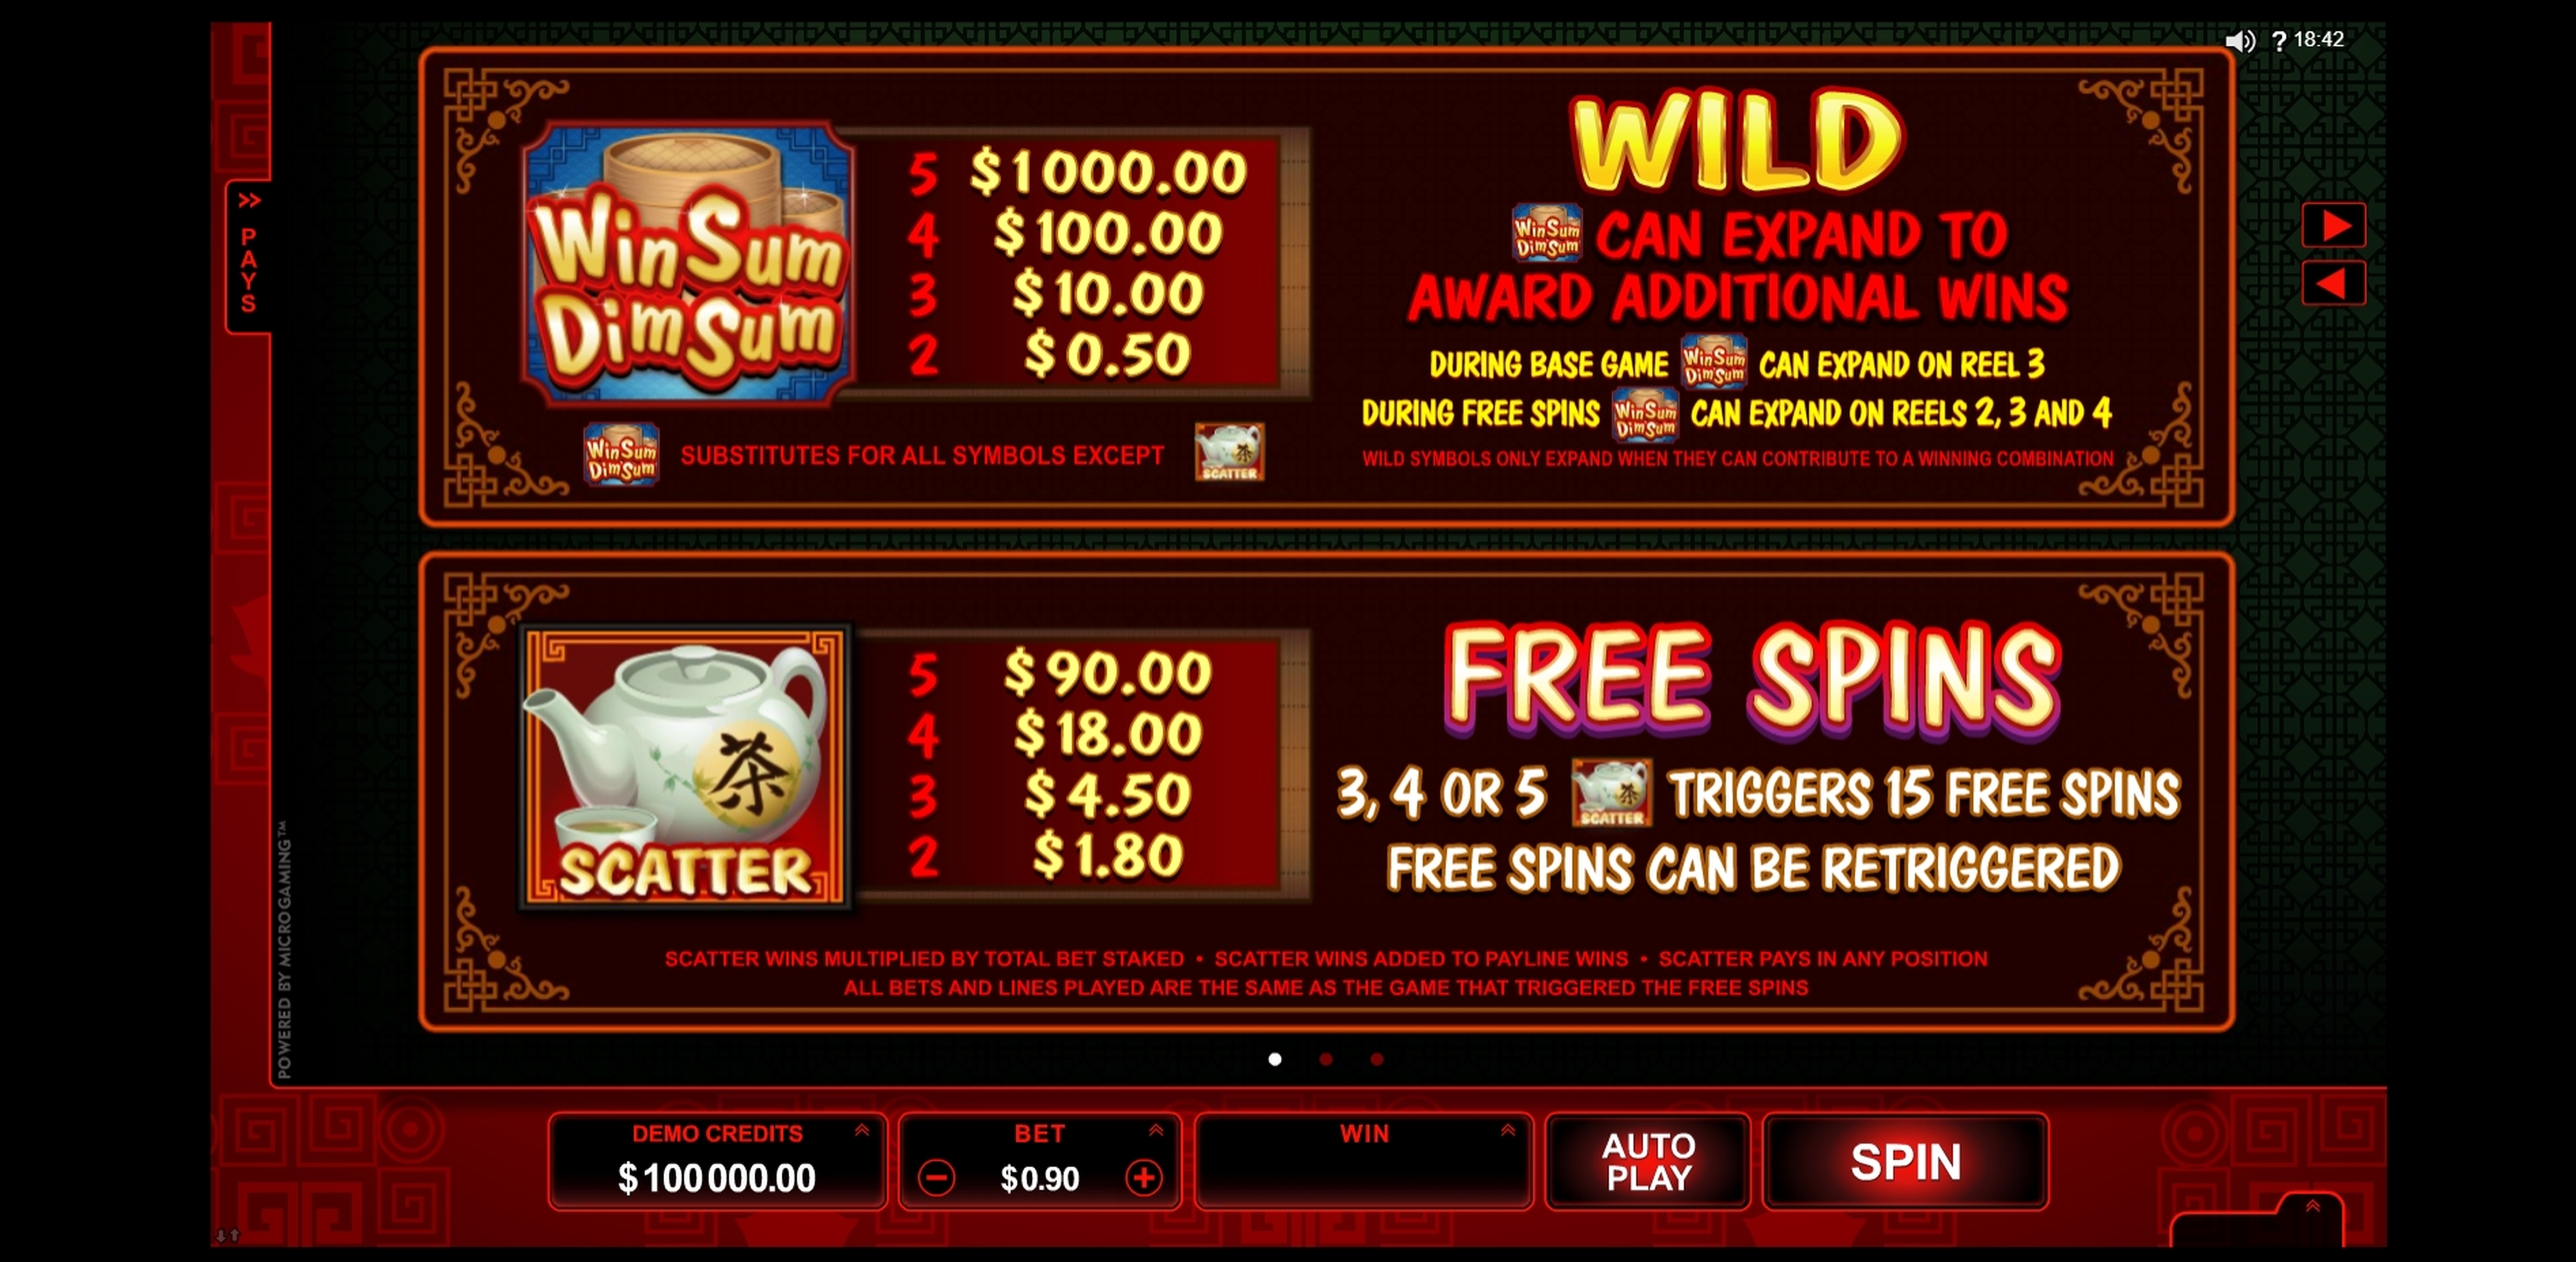 Info of Win Sum Dim Sum Slot Game by Microgaming